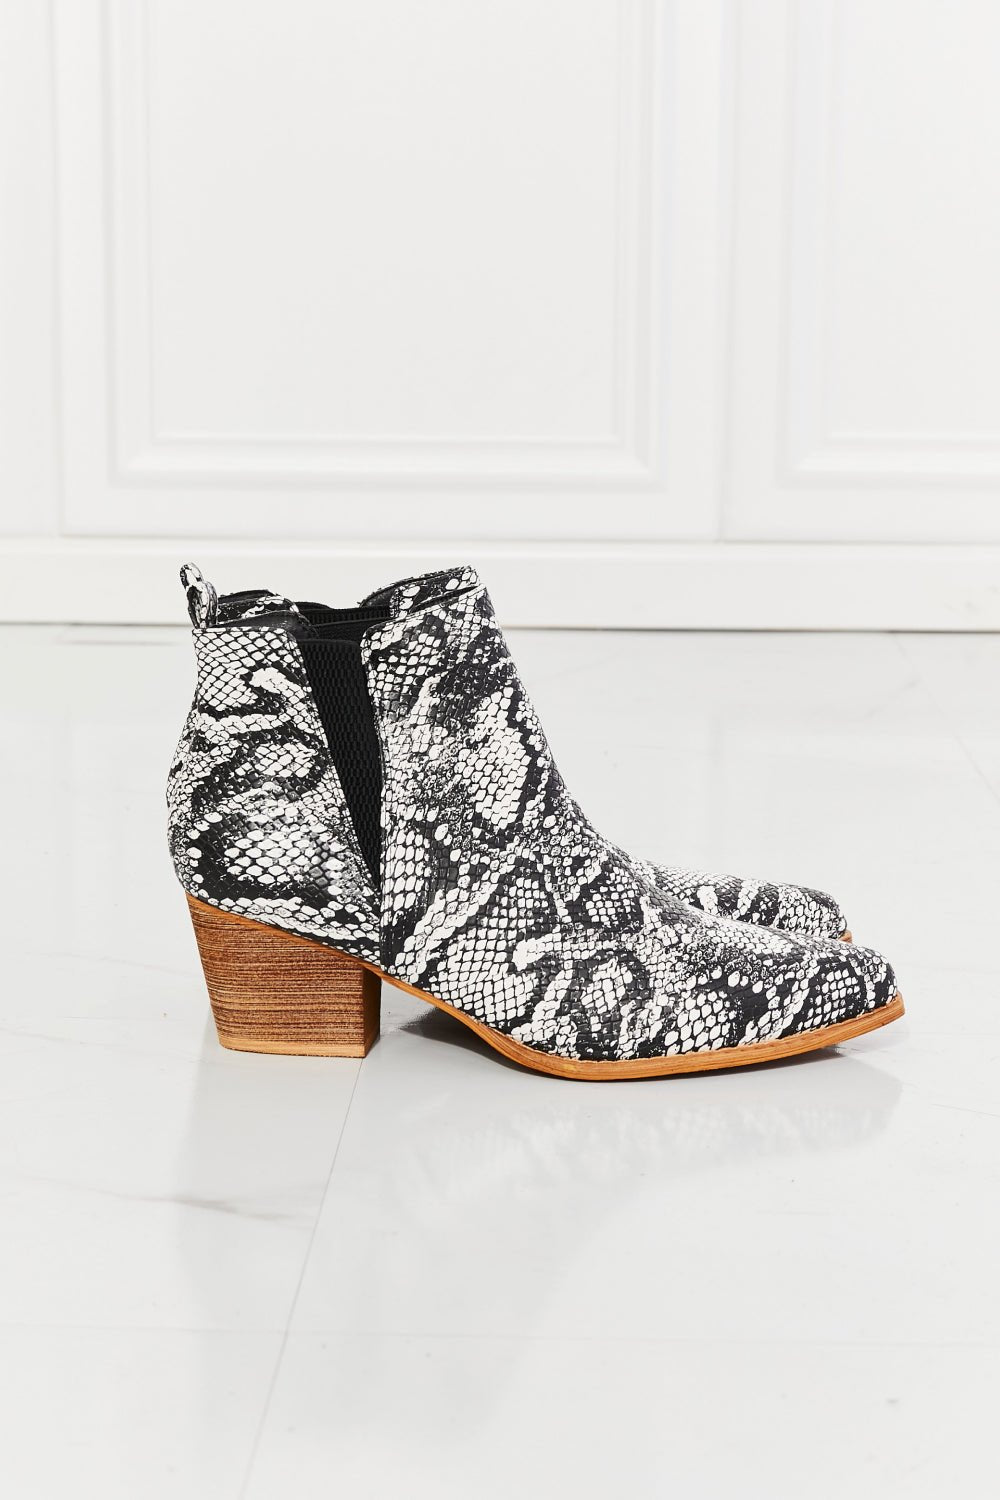 Vegan Leather Pointed Toe Bootie in SnakeskinBootiesMelody